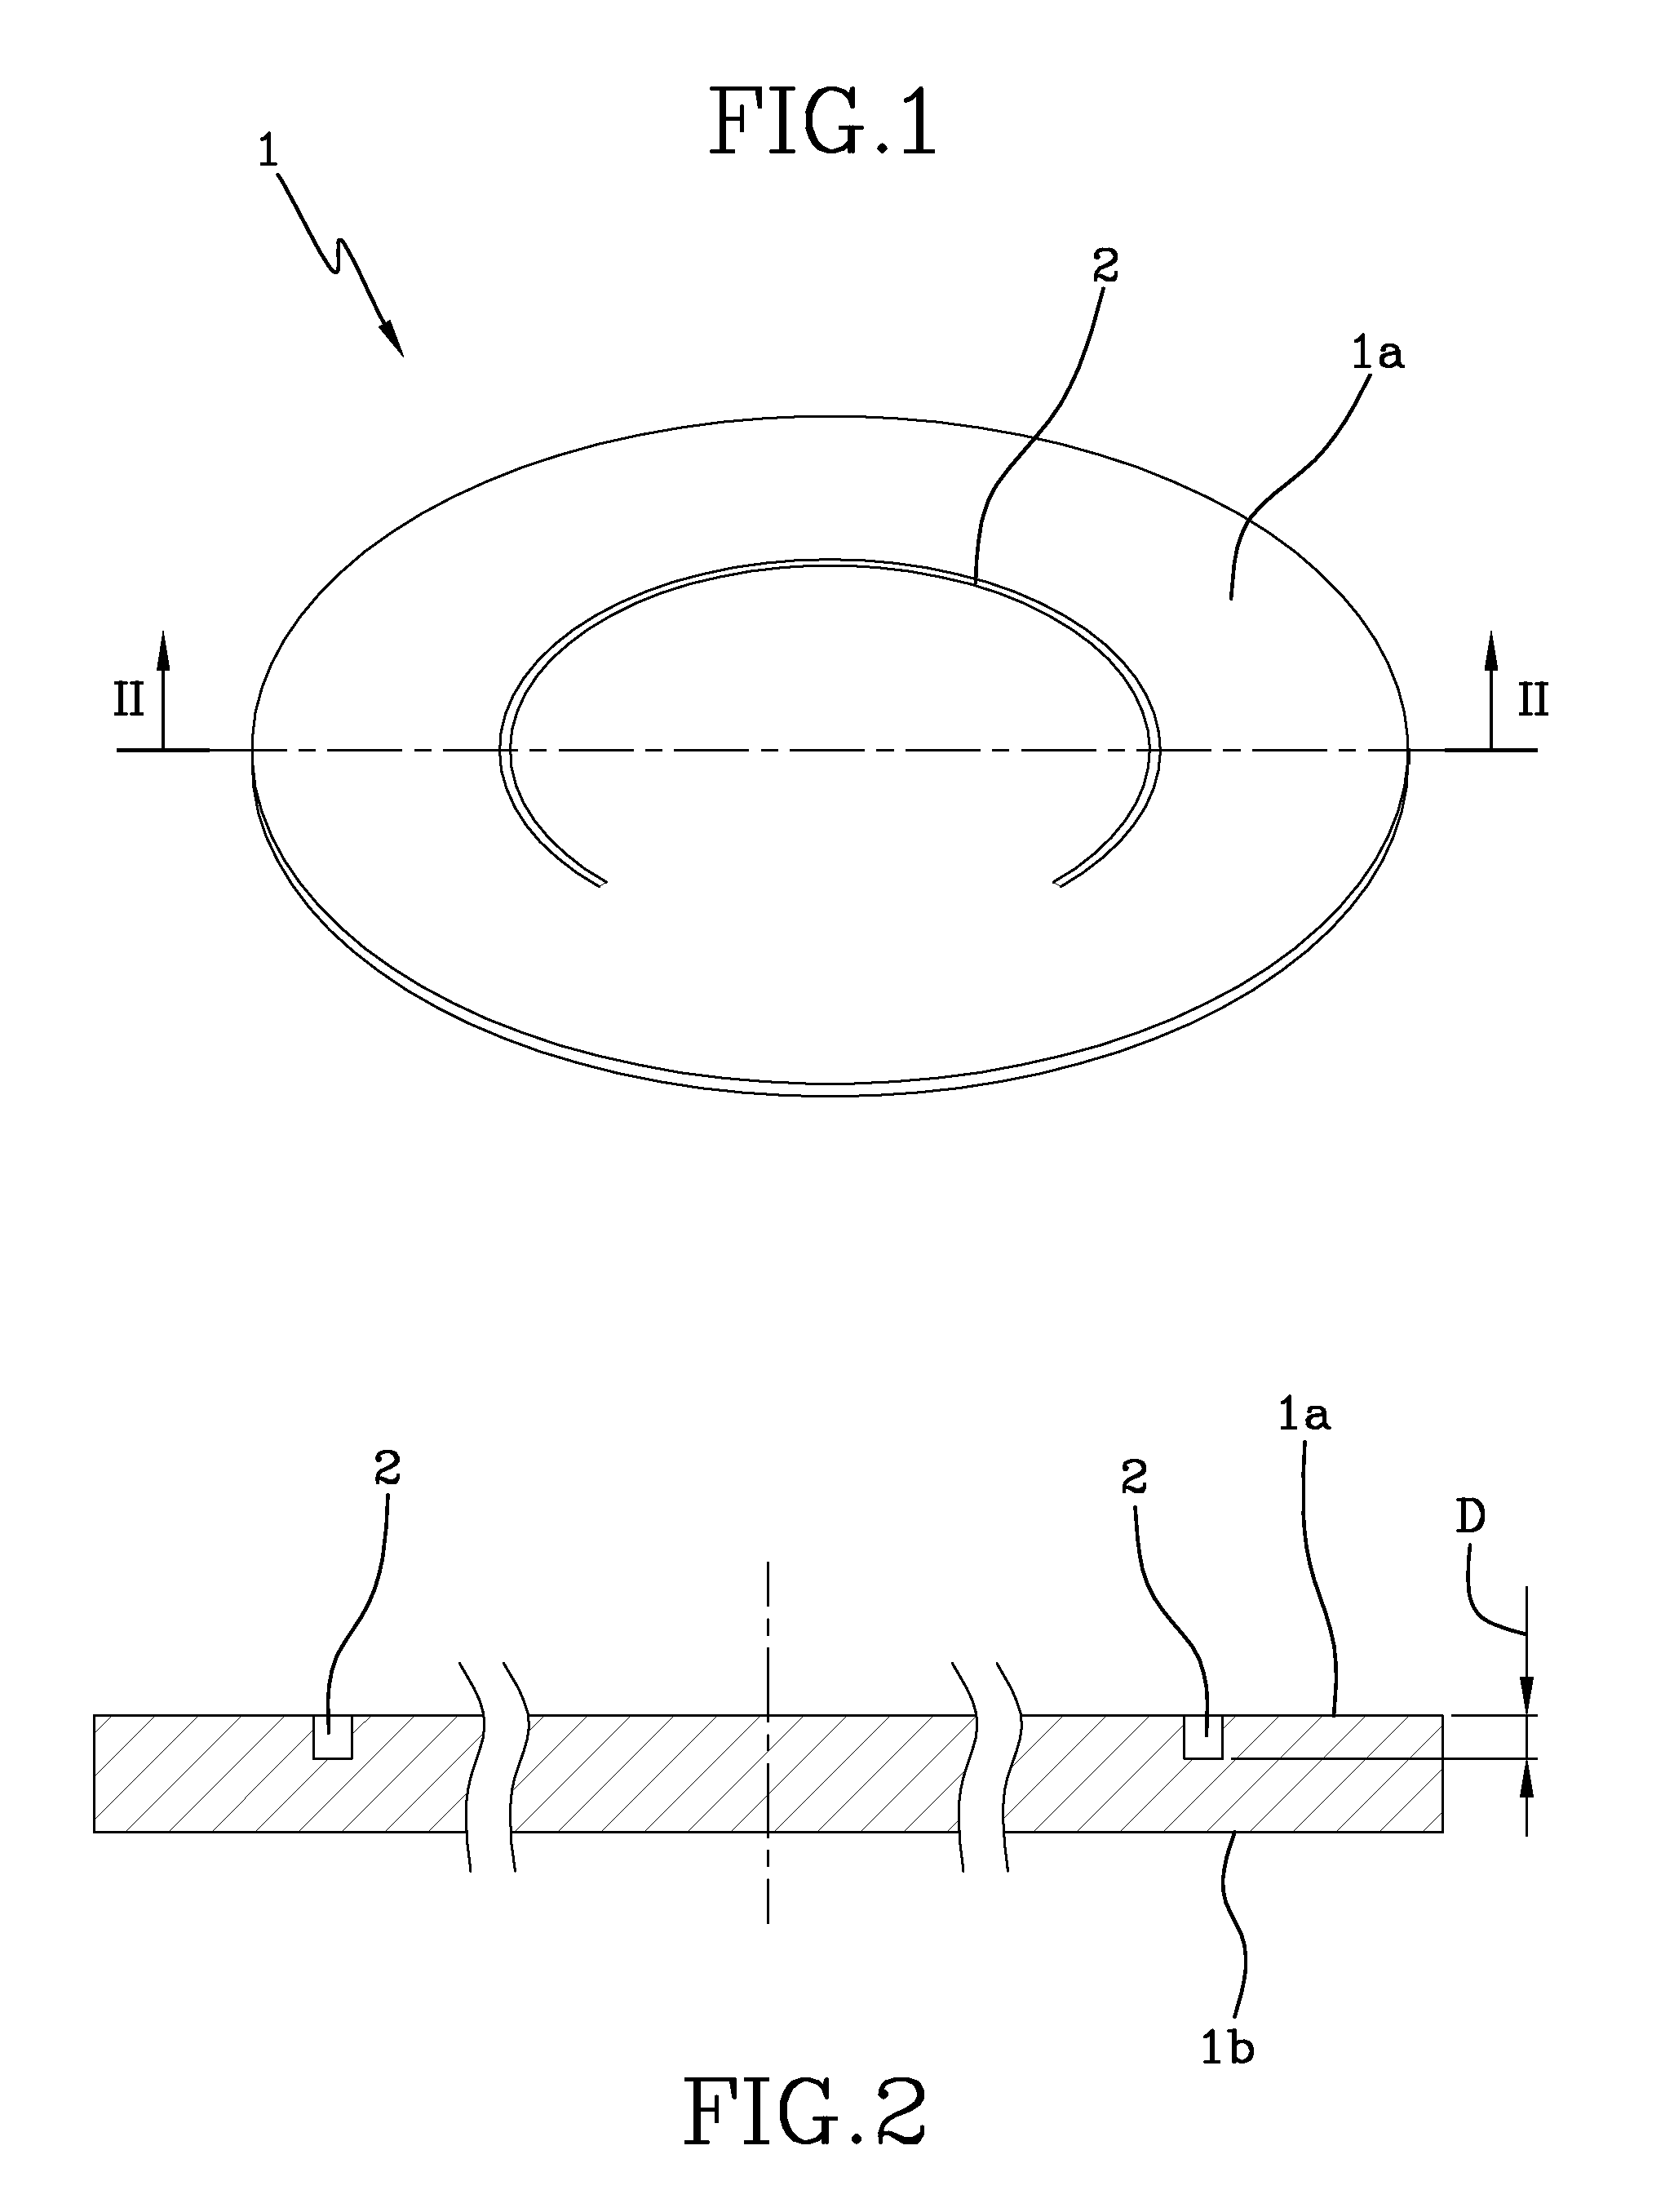 Method for production of safety/rupture discs